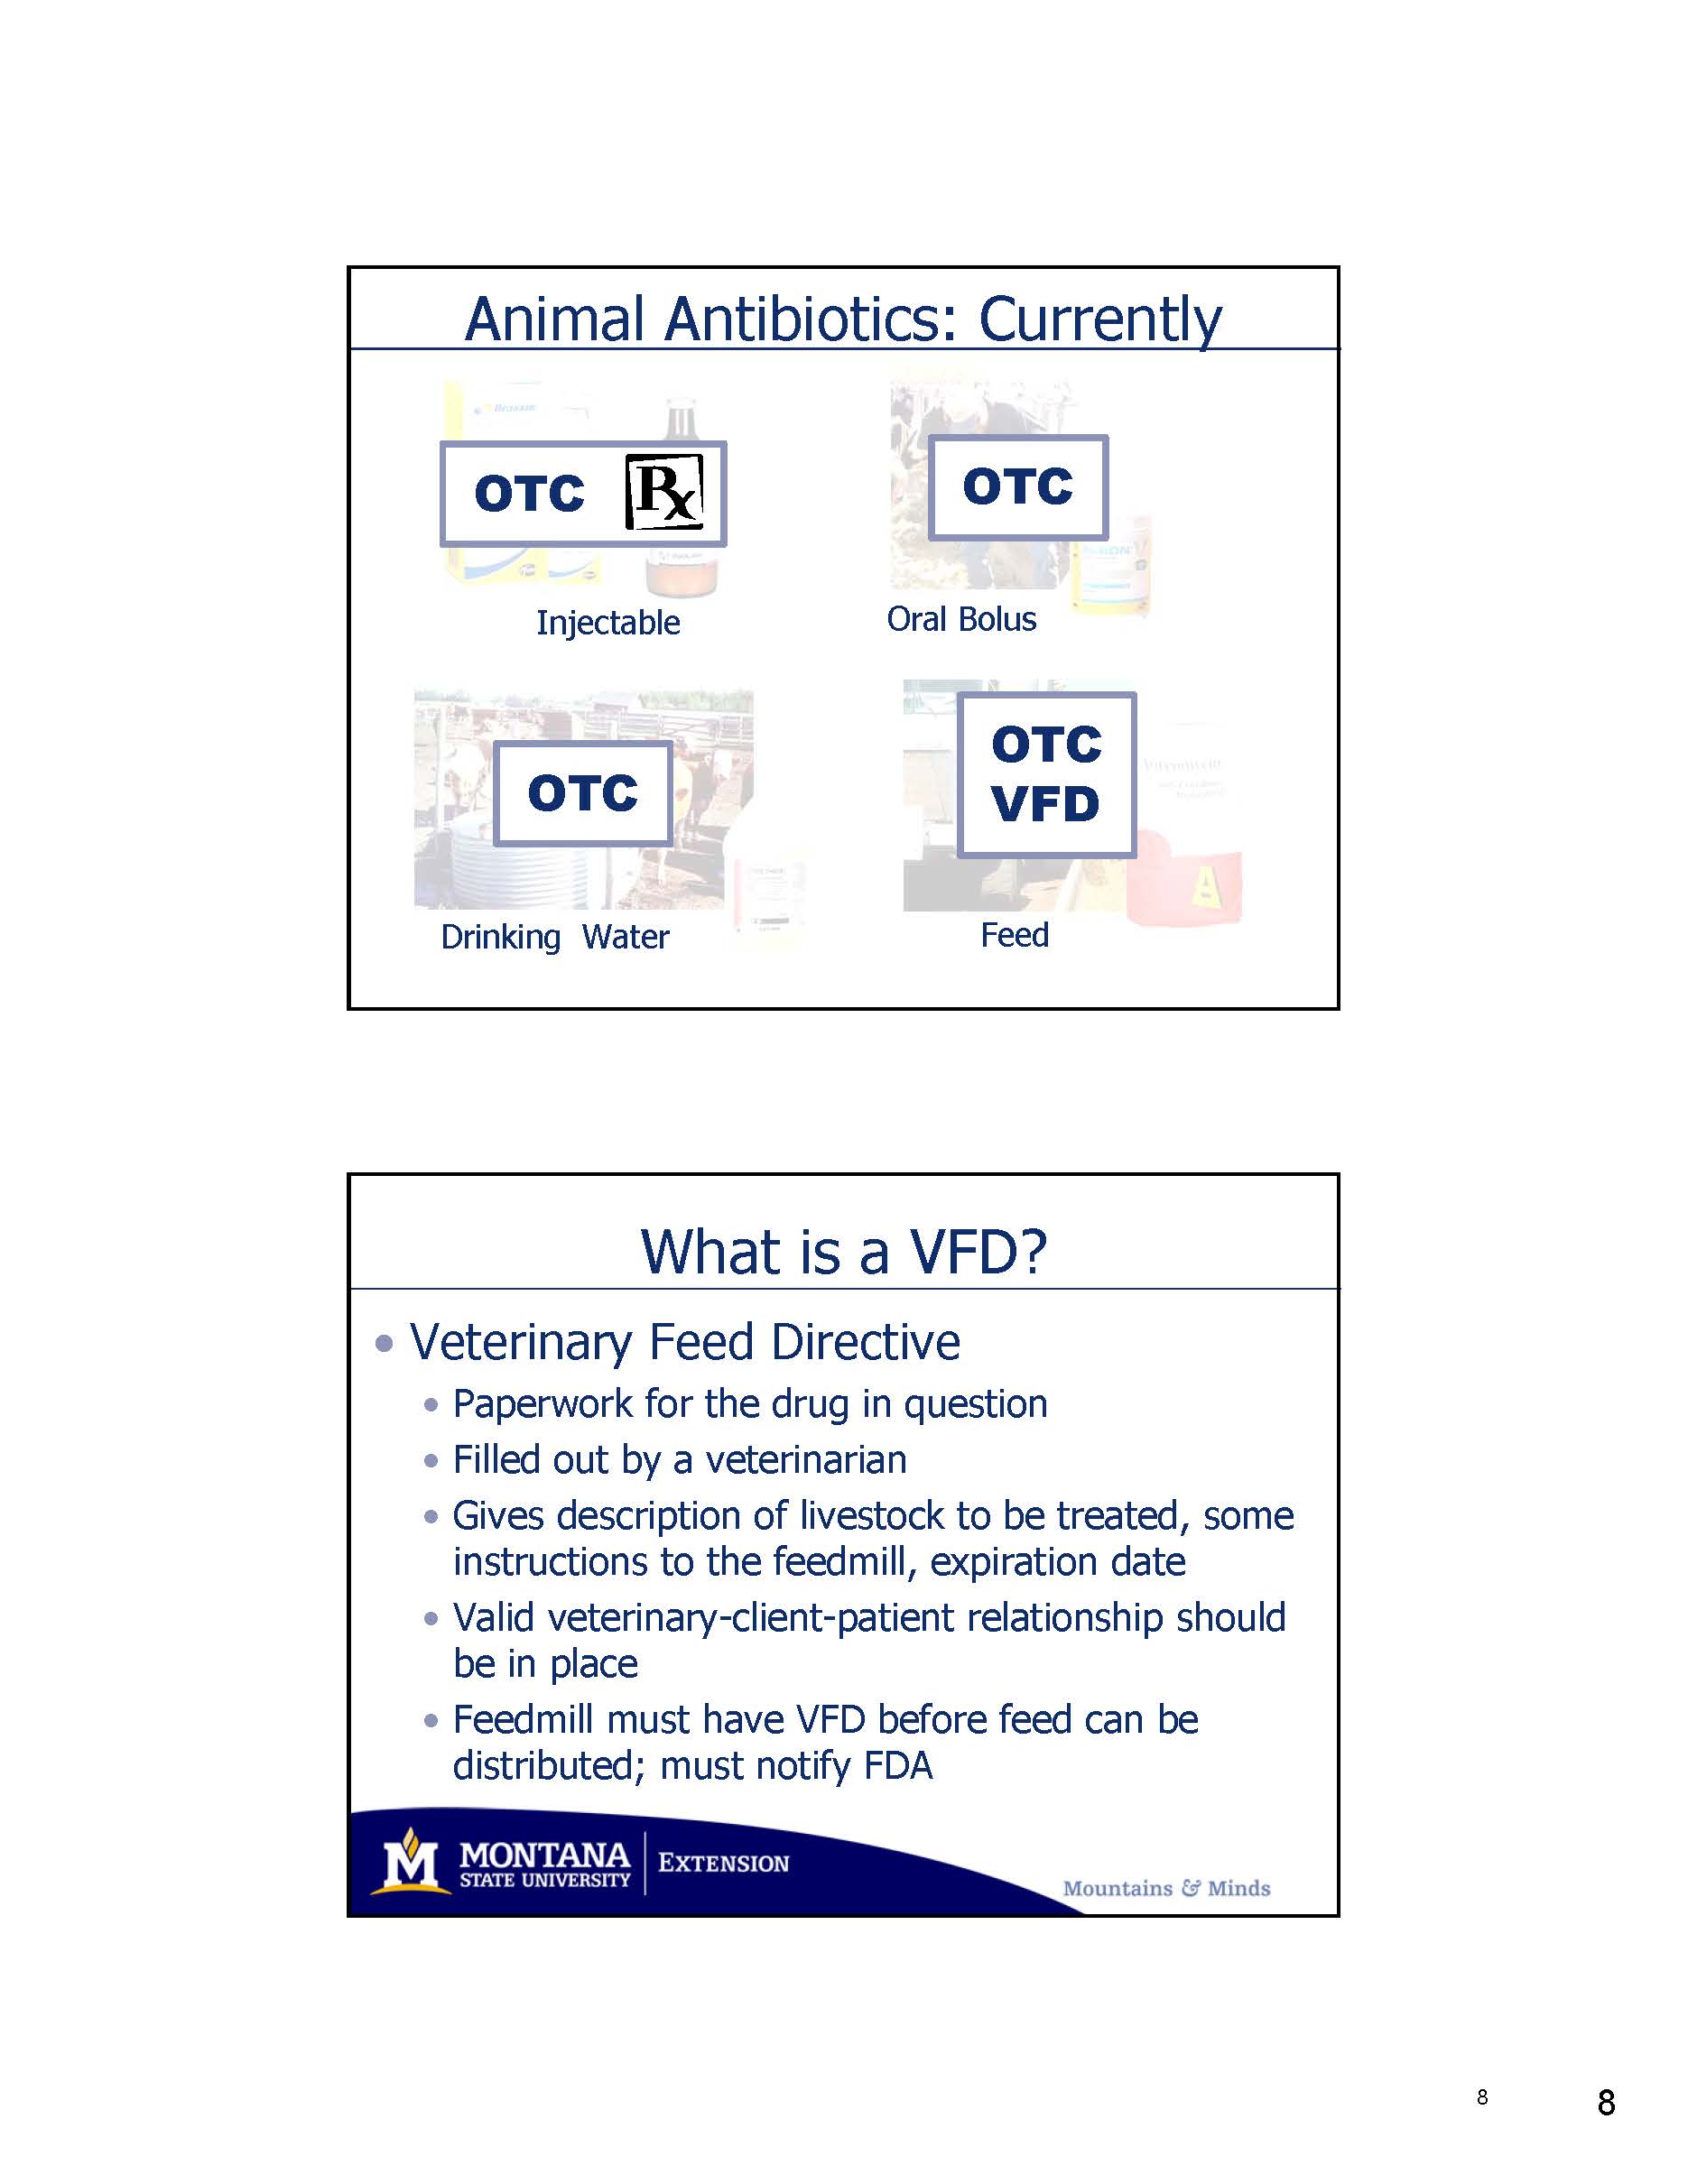 Slides showing basic information about the veterinary feed directive and the changes in the use of feed grade antibiotics for livestock.